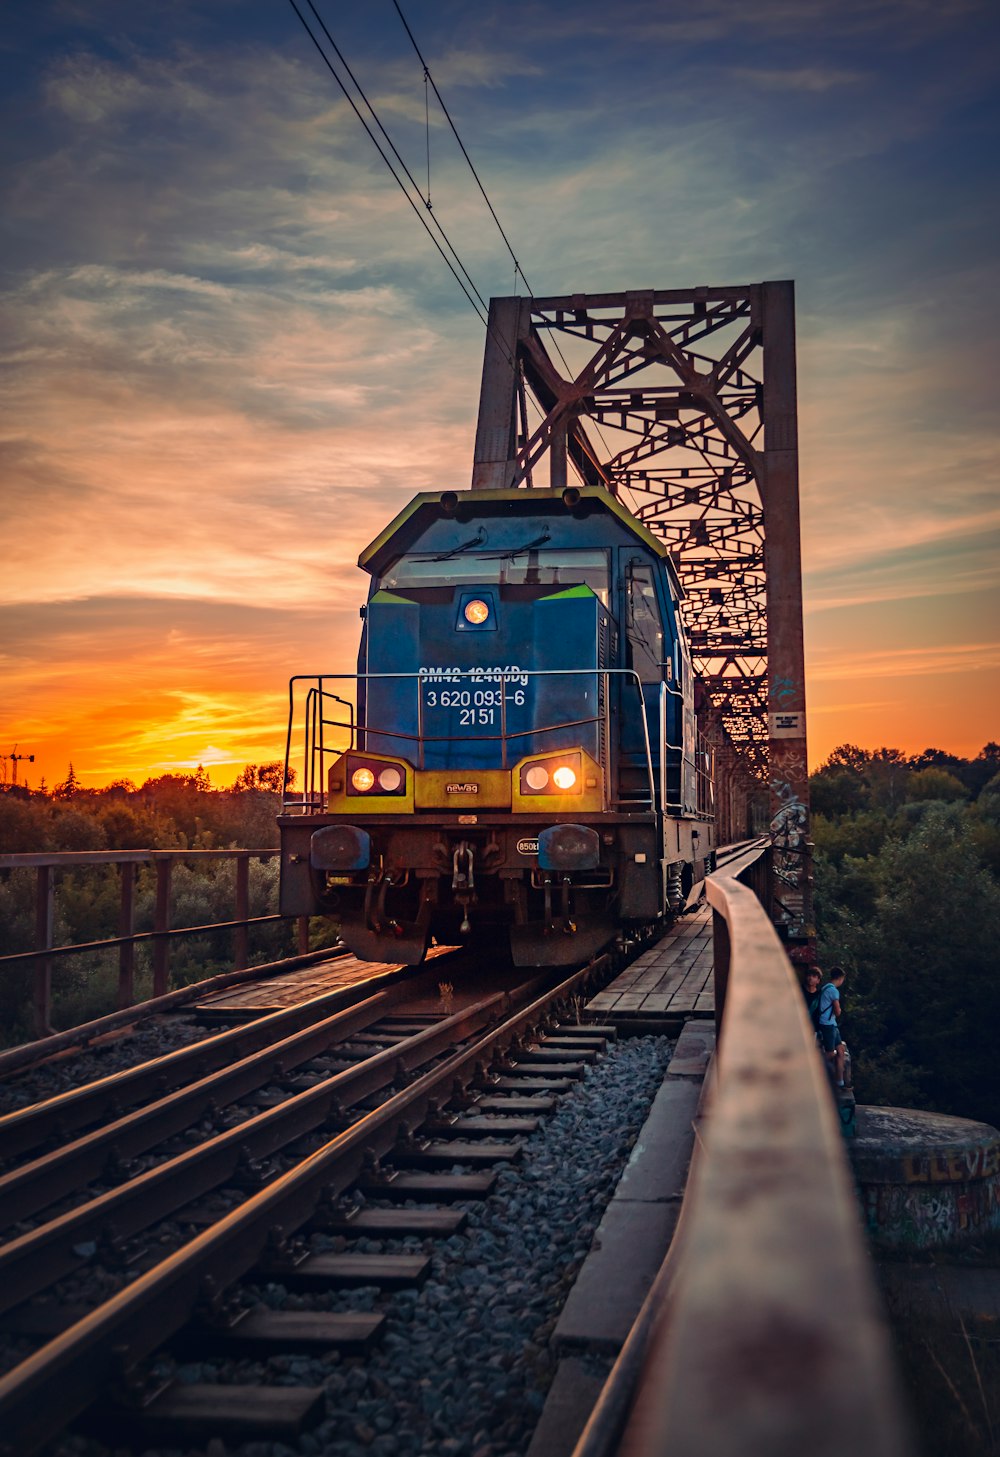 green and brown train on rail tracks during sunset